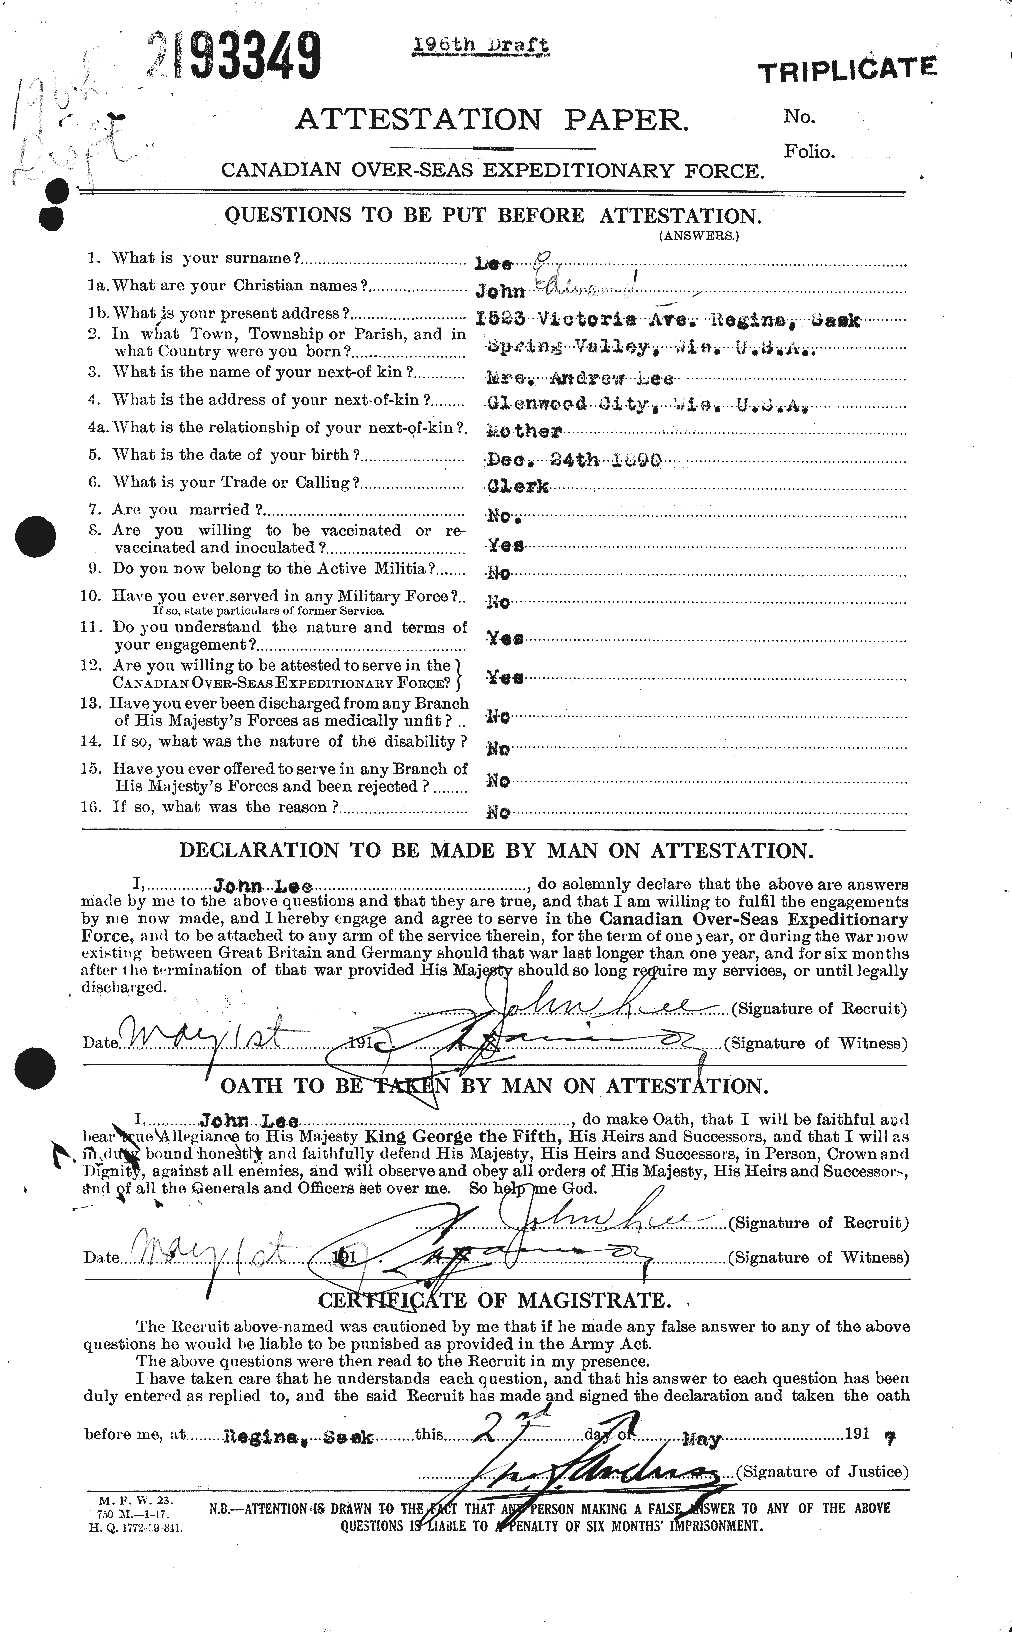 Personnel Records of the First World War - CEF 456954a